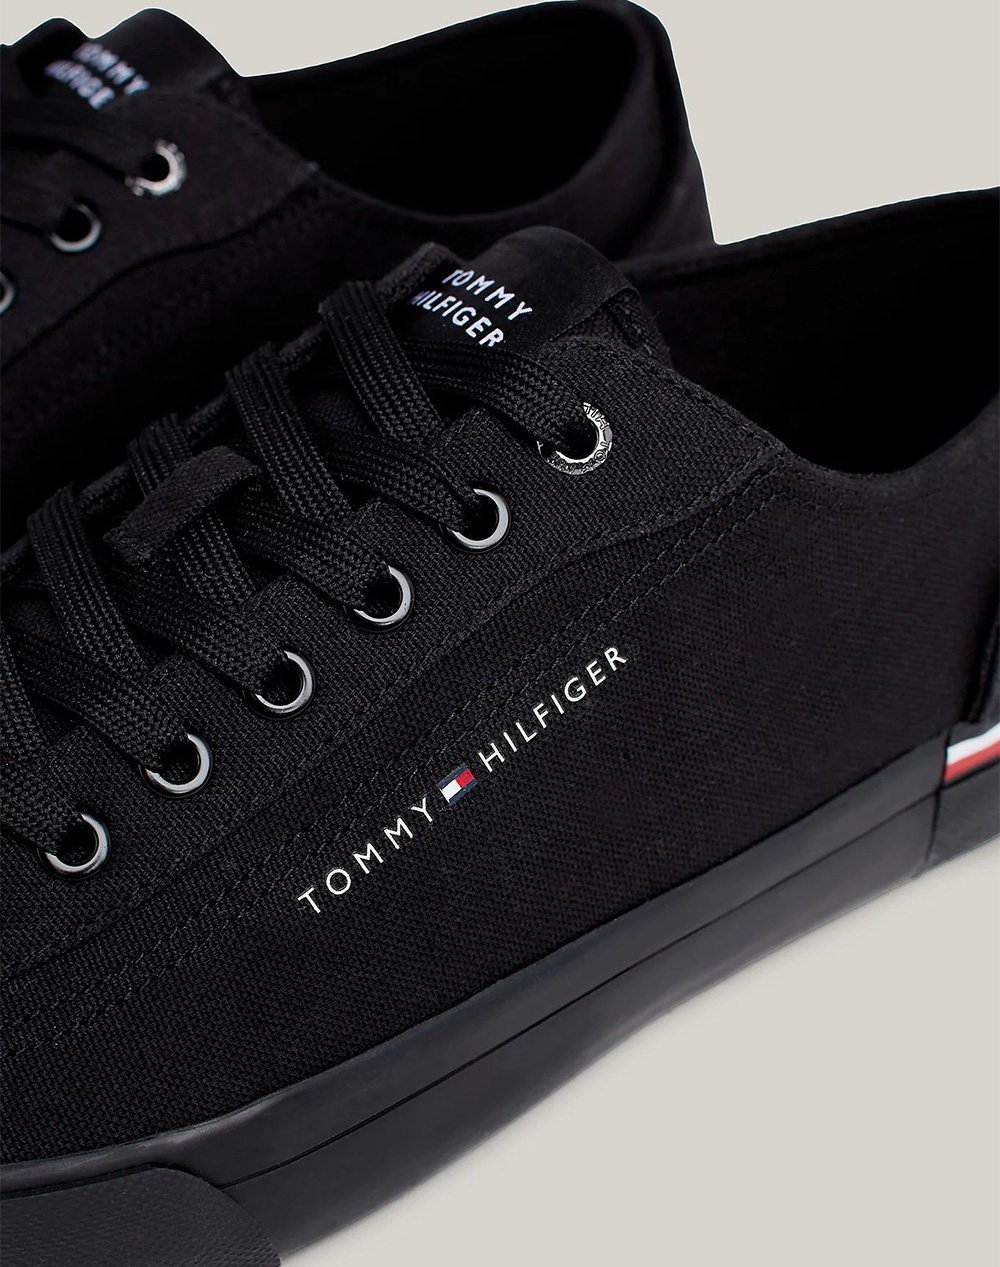 TOMMY HILFIGER CORPORATE VULC CANVAS